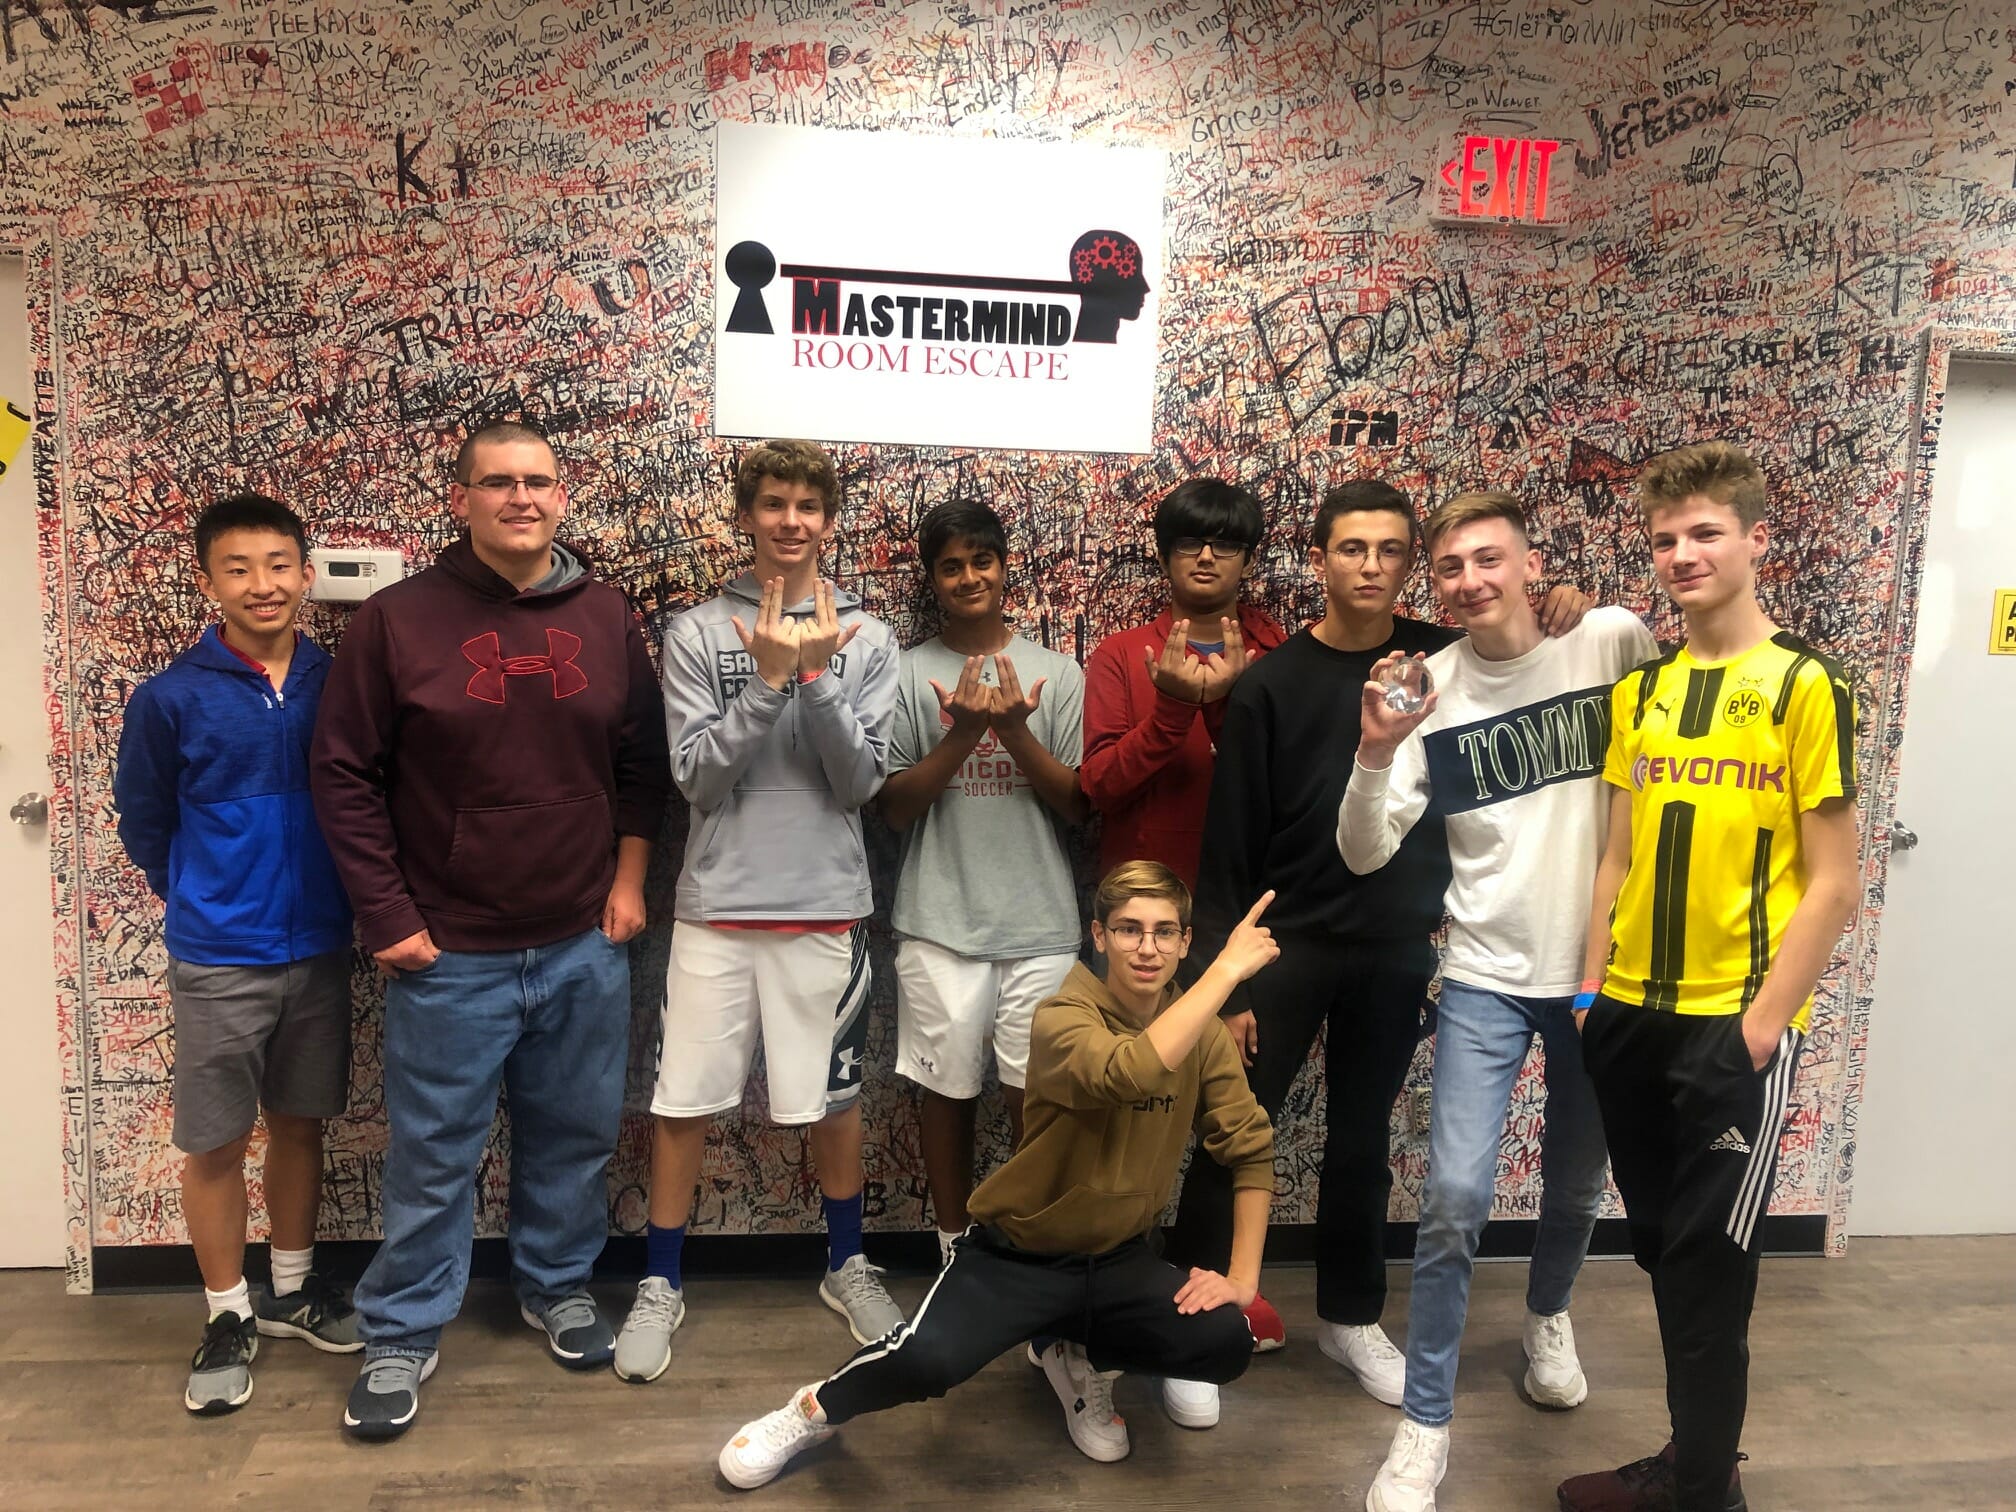 French Exchange Students escape room